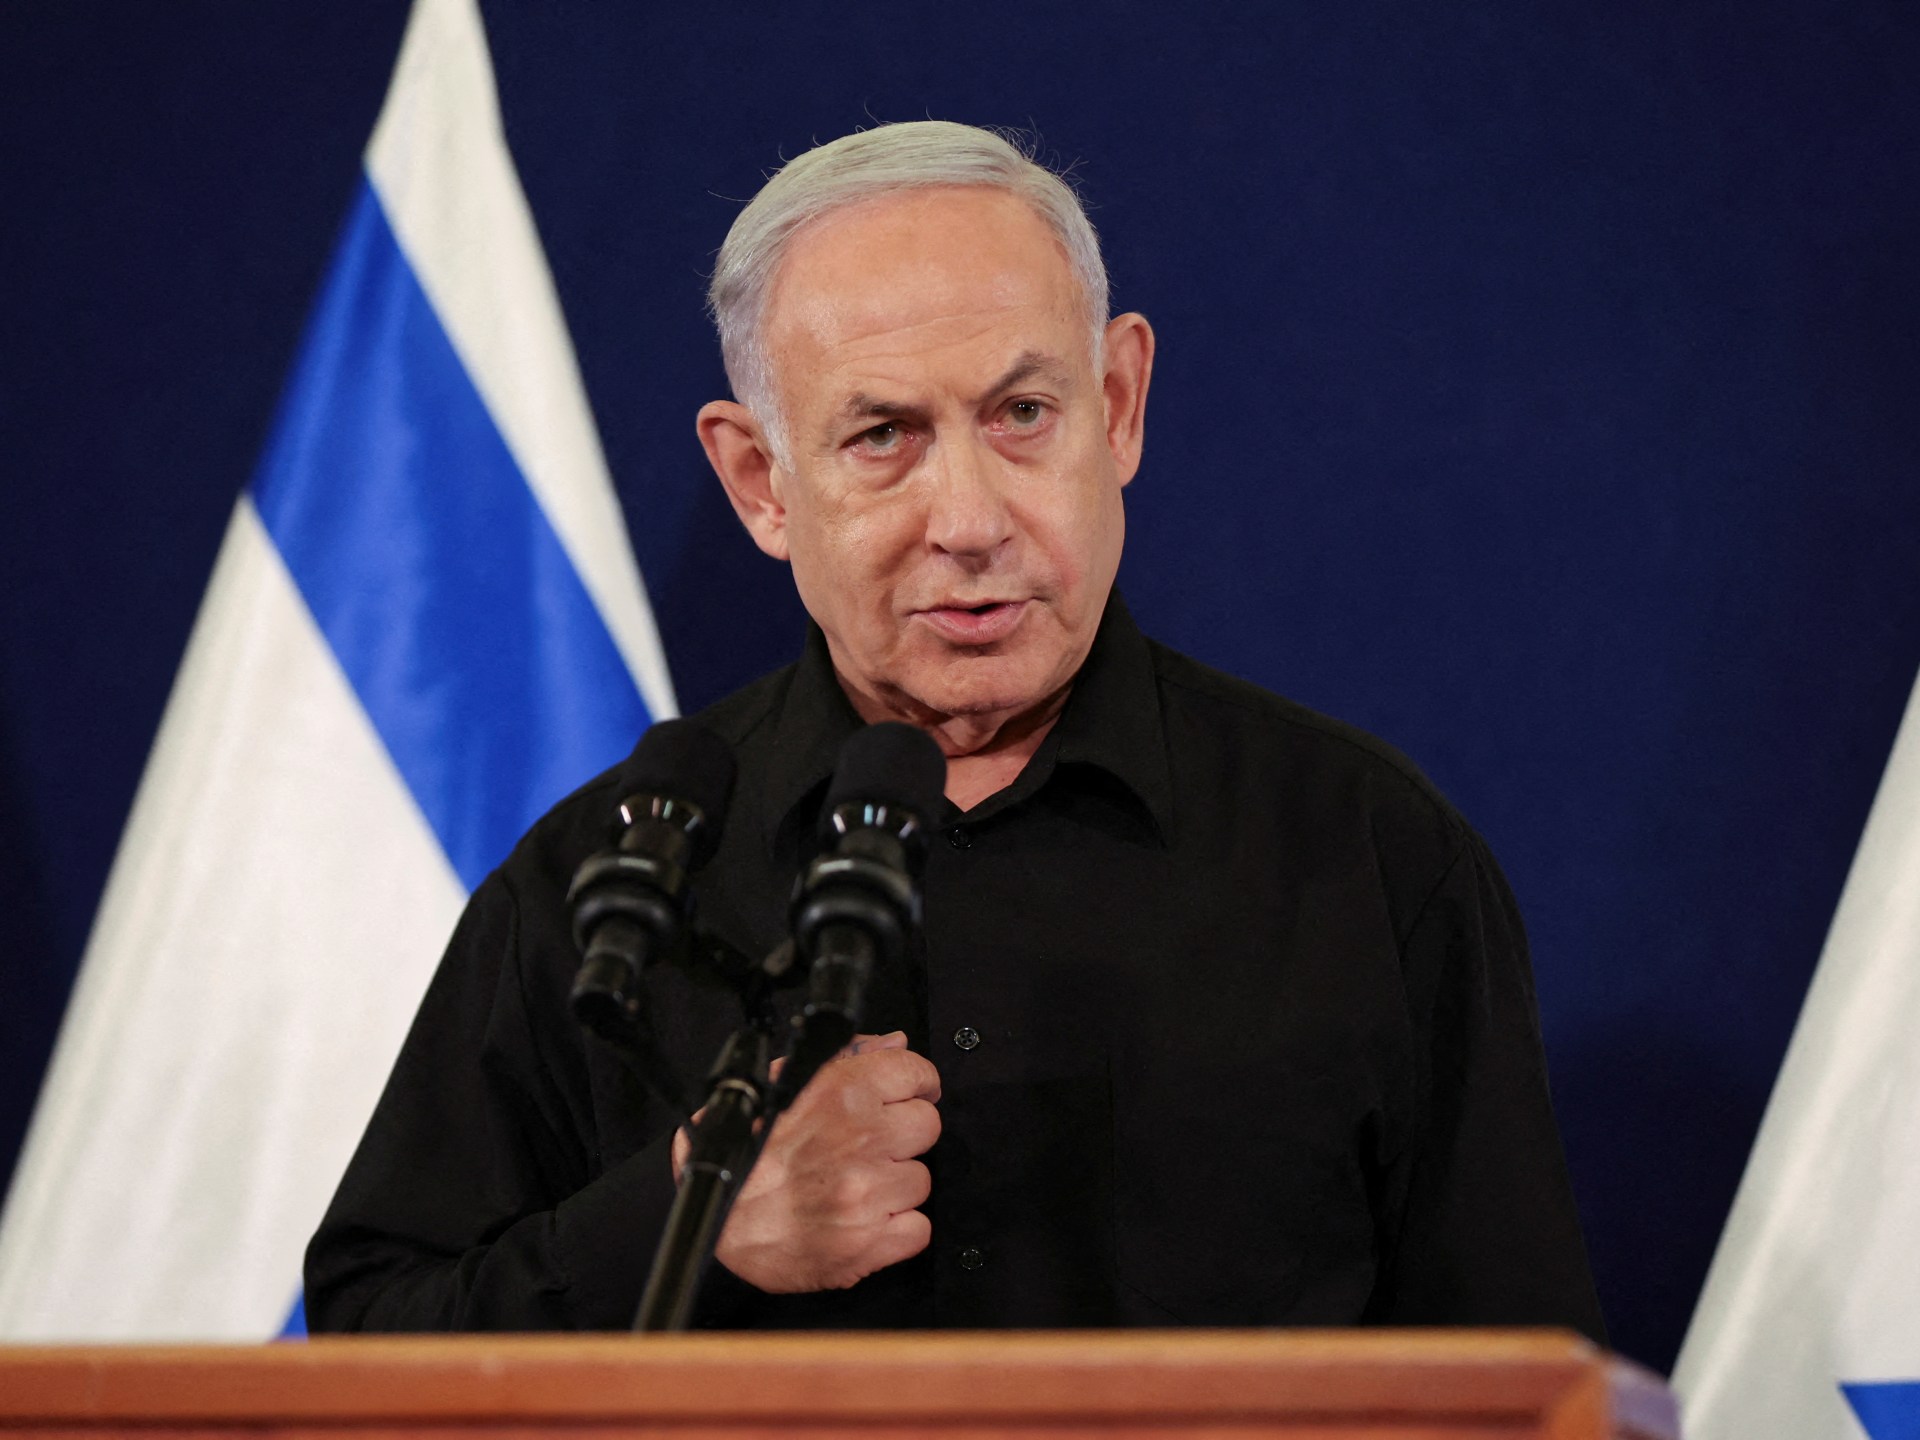 Netanyahu says war entering ‘second stage’ as troops push into Gaza